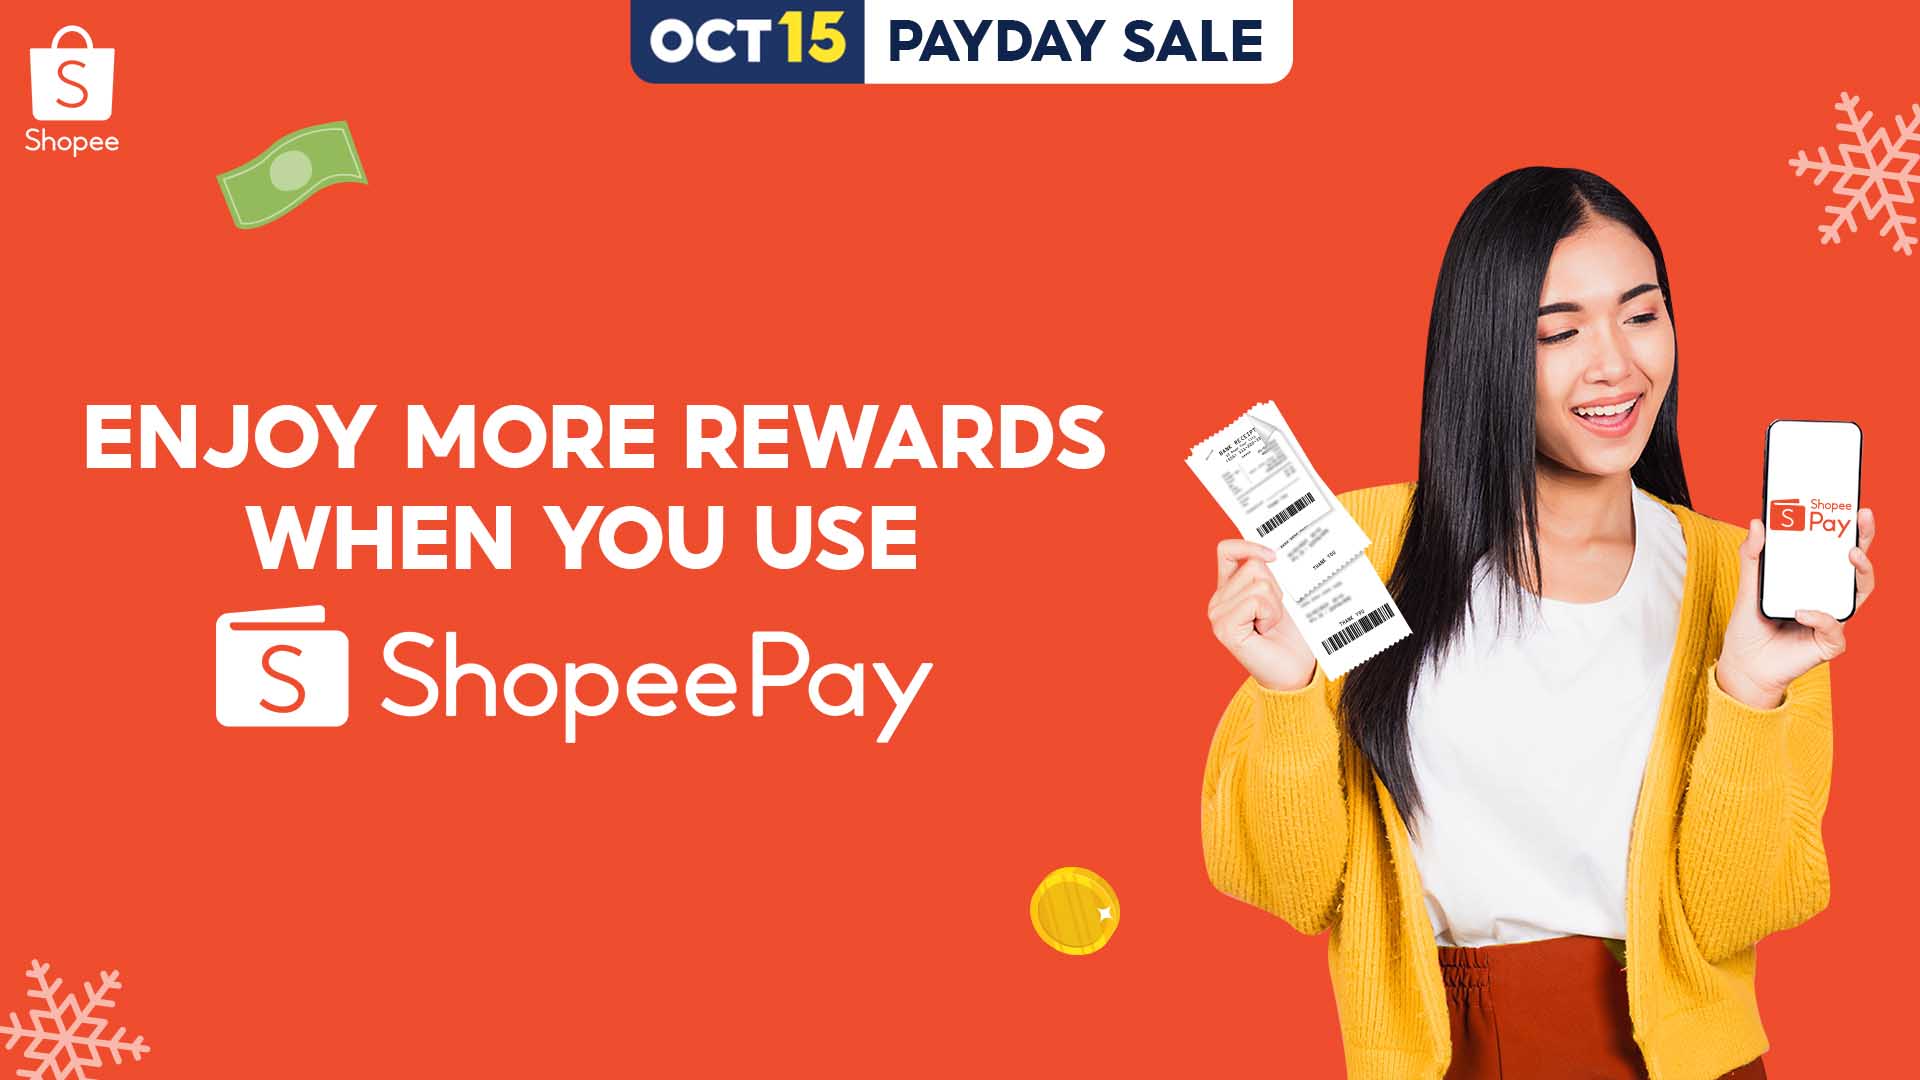 Maximize Your Suweldo this Payday Sale and Save More When Paying for Bills via ShopeePay